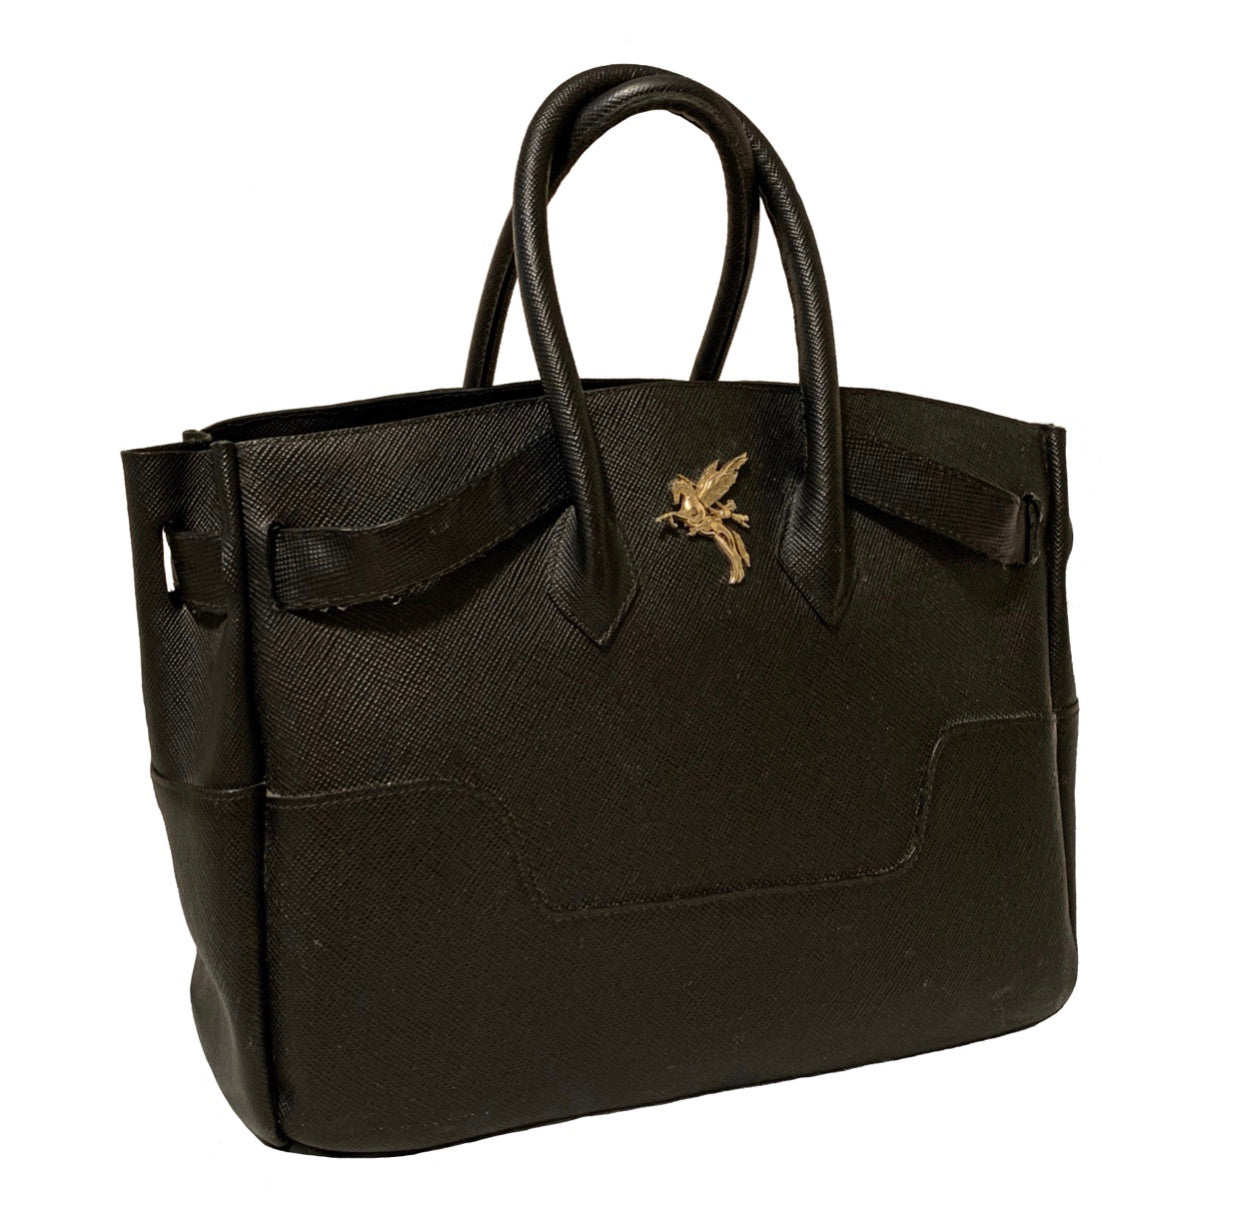 Black leather handbag side profile with gold hardware. This bag has top handles and adjustable sizes. the handbag is handmade in Boston Massachusetts. The logo. is Bellerophon on the back of pegasus rearing.